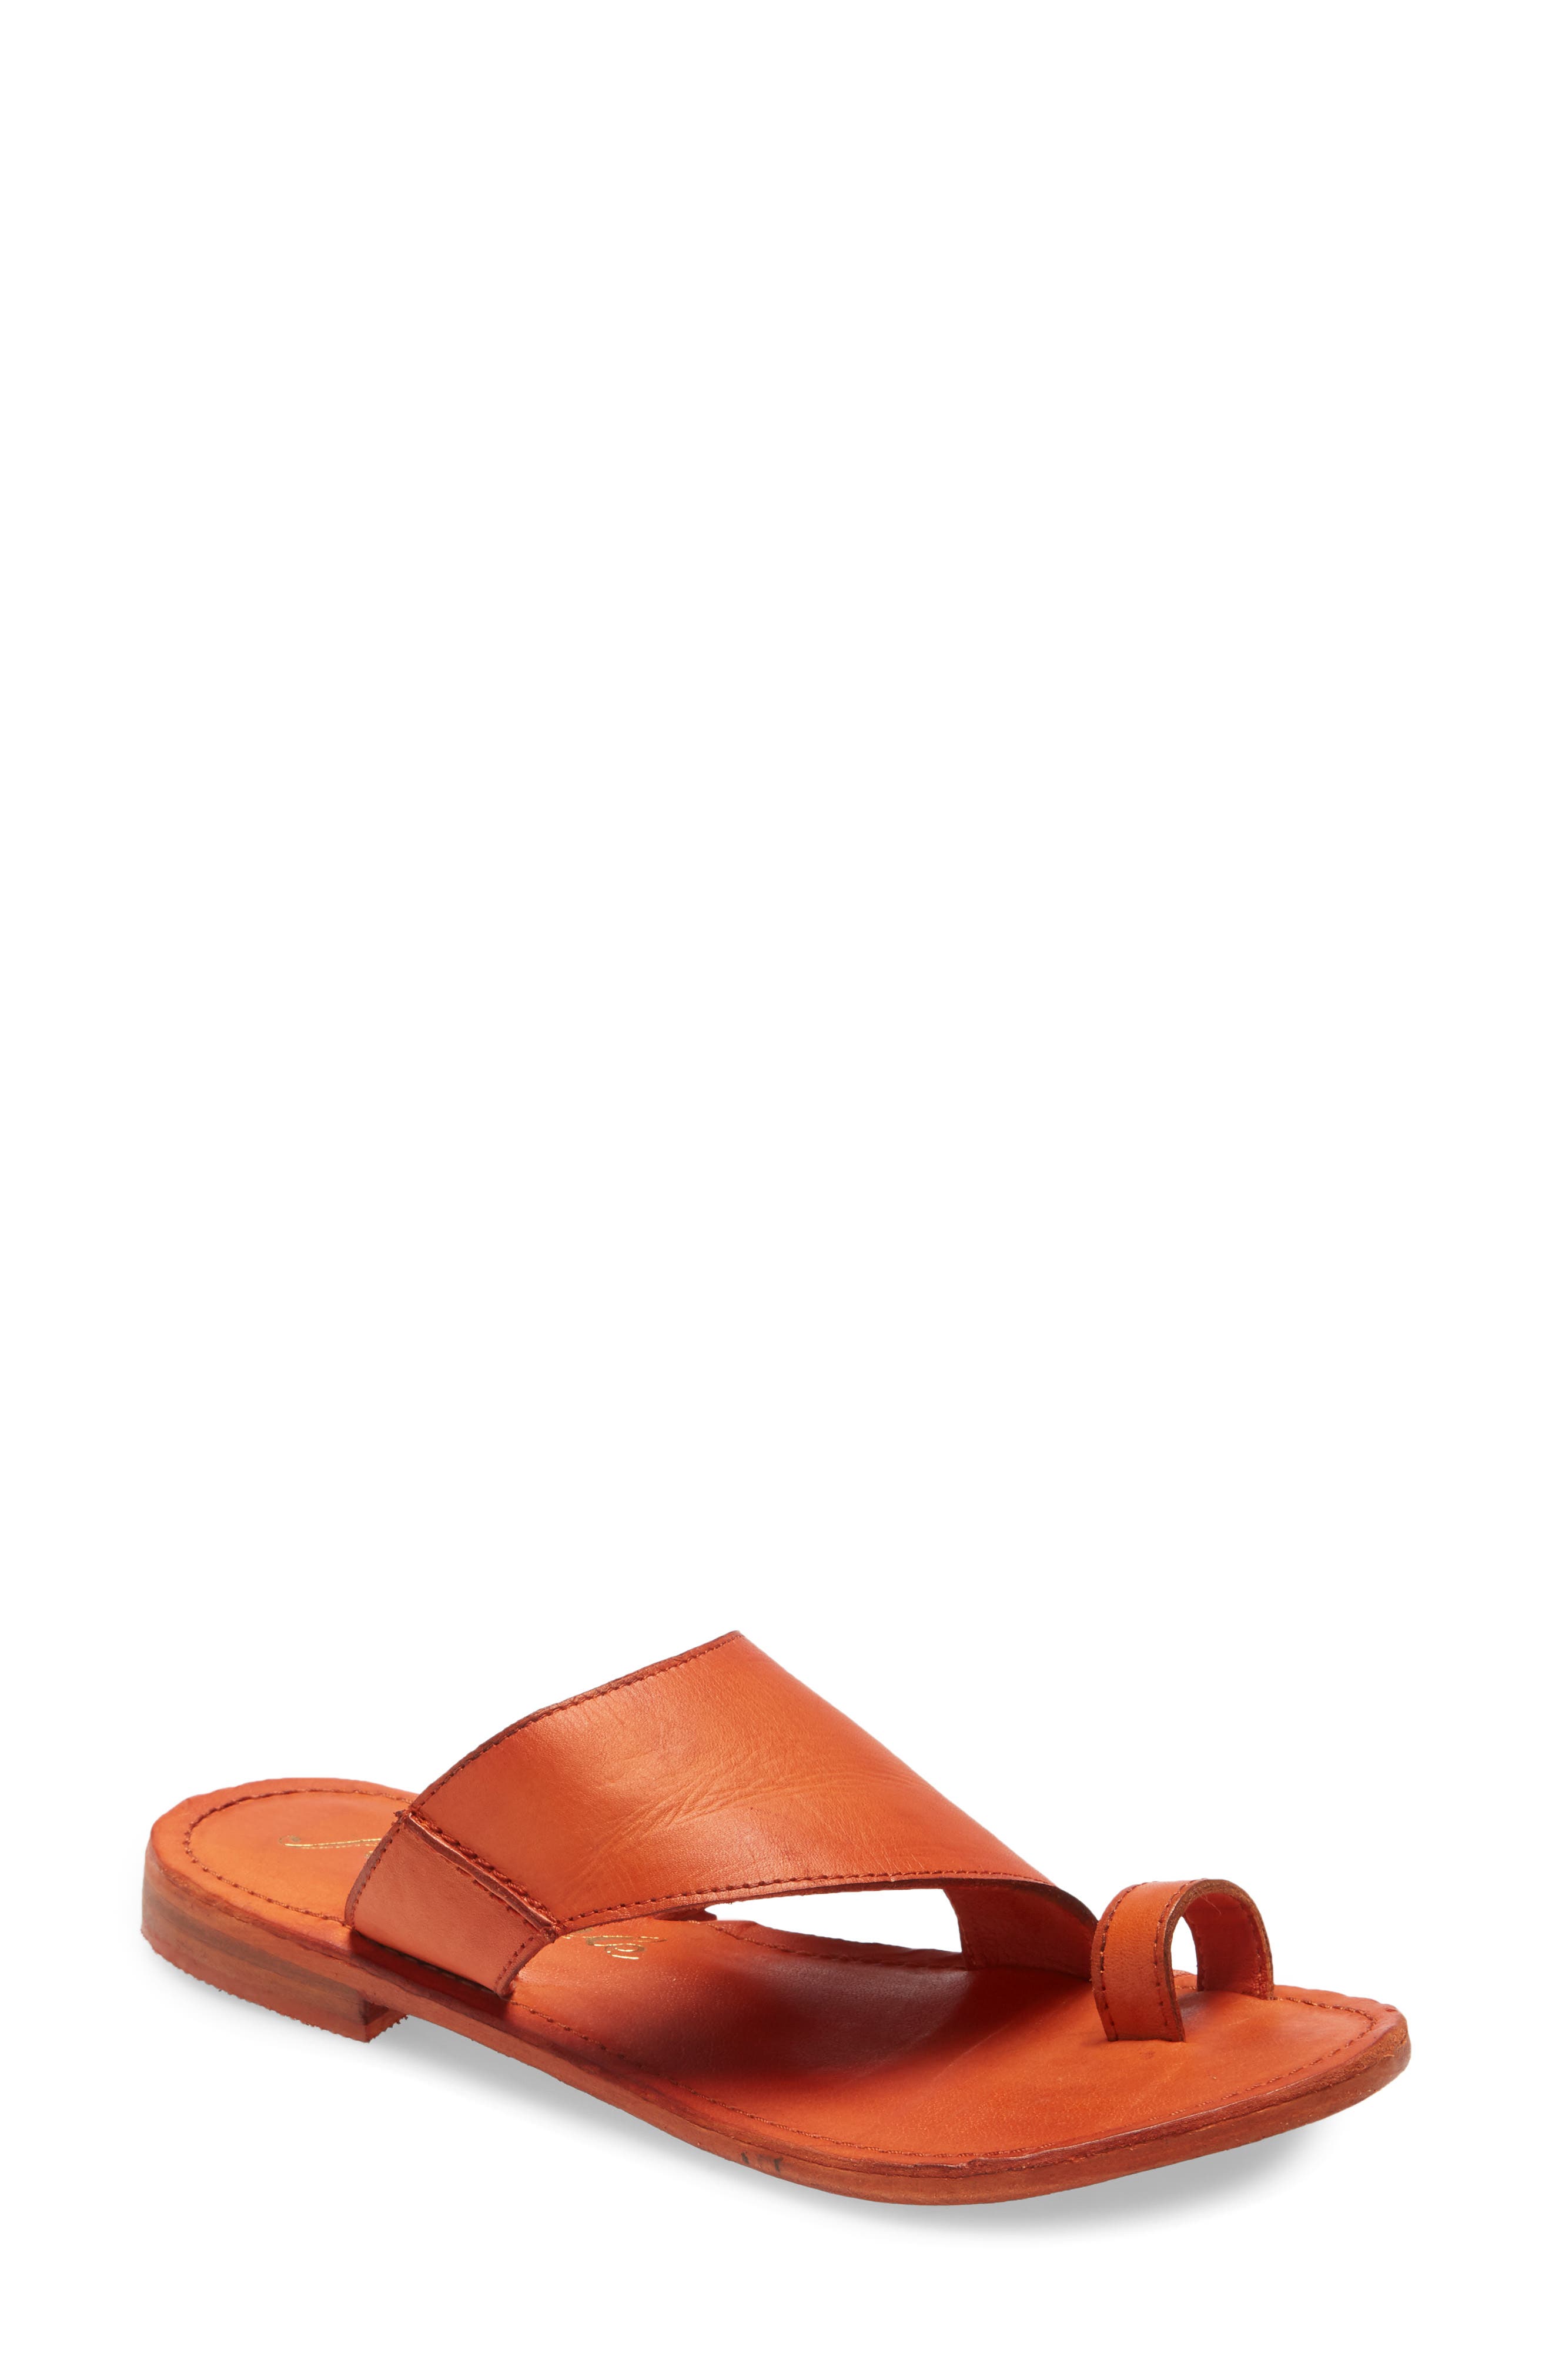 free people shoes nordstrom